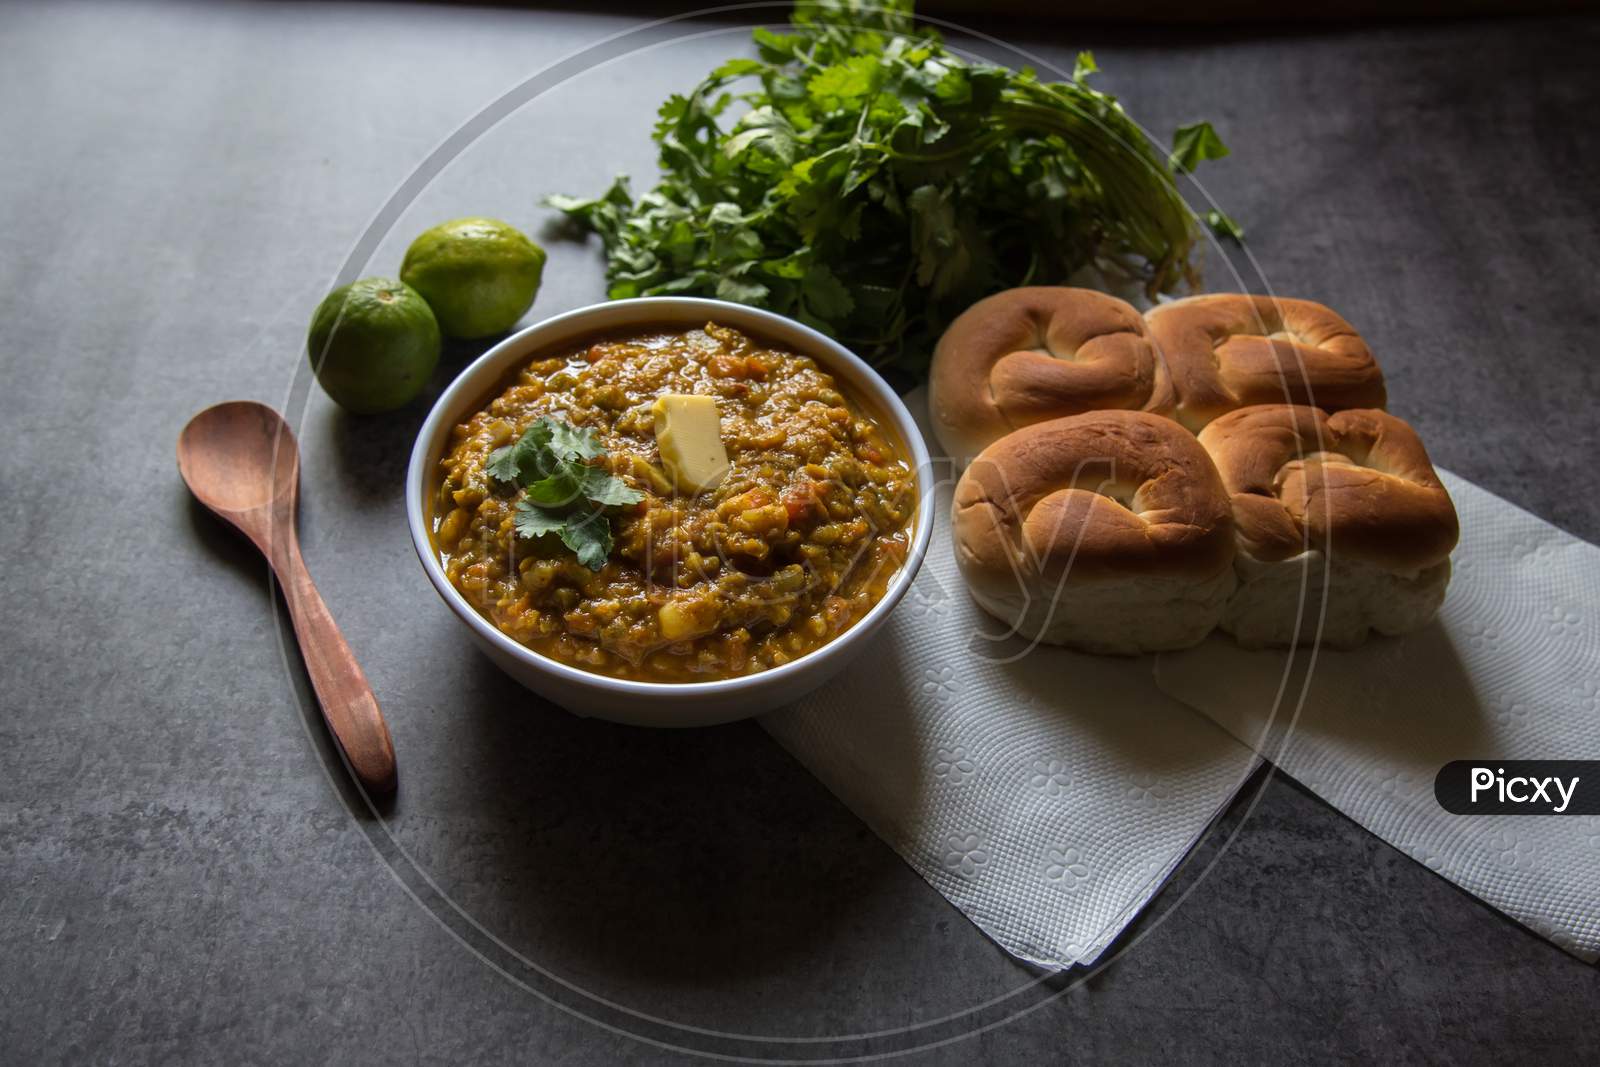 Spicy Indian dish pav bhaji or bread with masala curry along with food ingredients